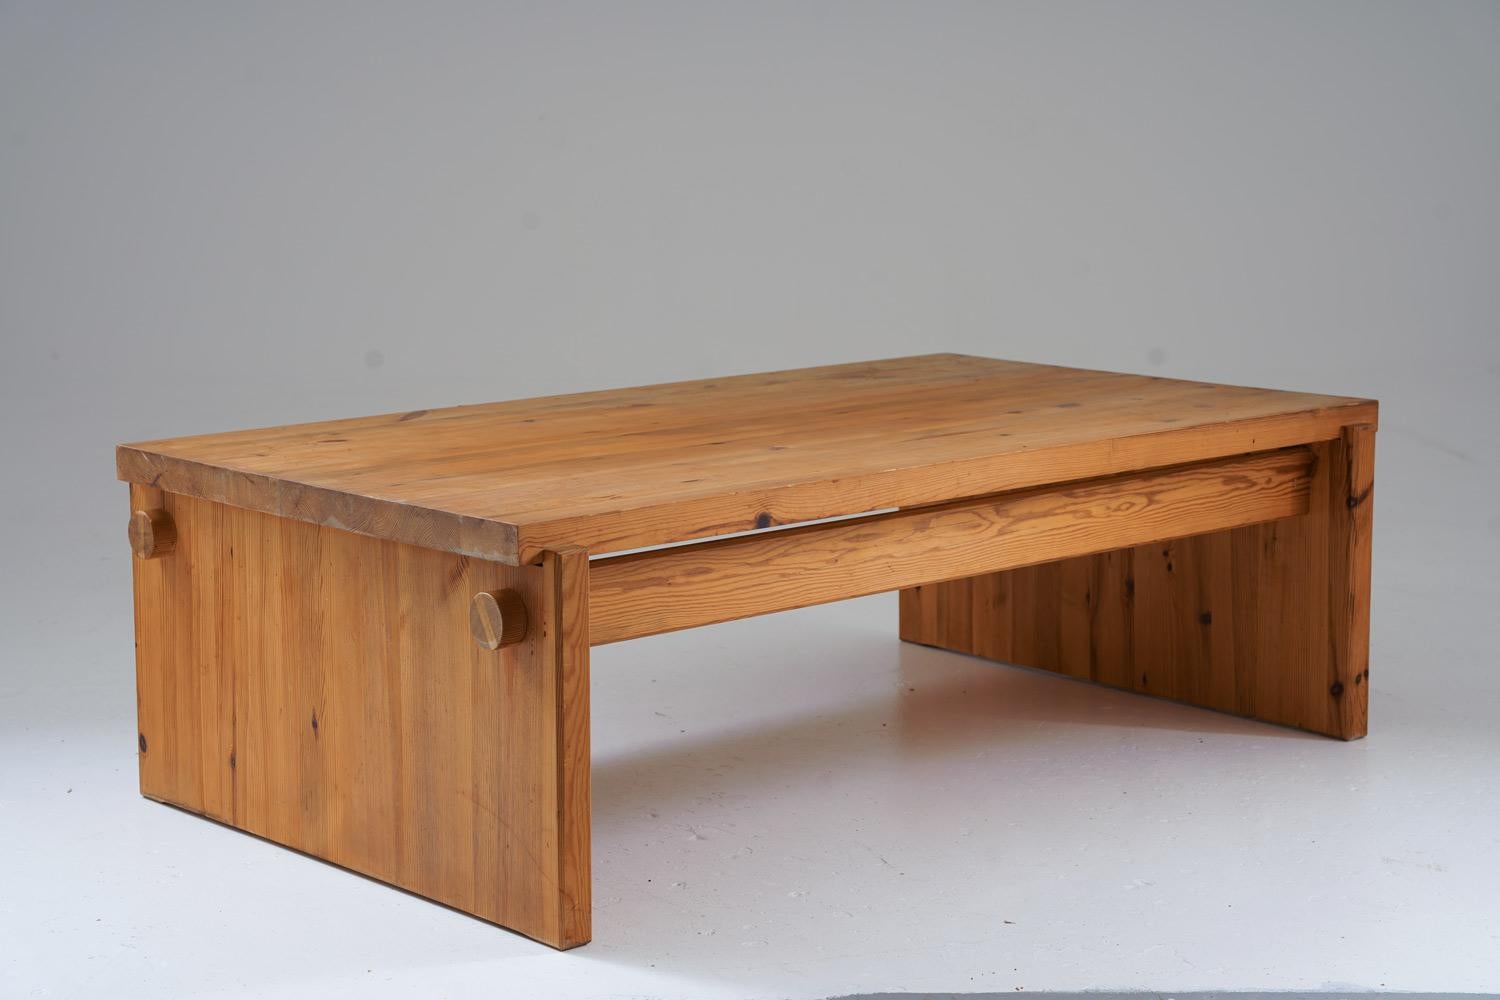 Coffee table in pine by Yngve Ekström for Swedese, circa 1970.
This table is a great example of the robust pine furniture era that grew popular in Sweden in the late 1960s. The table is made of thick solid pine.
Condition: Good vintage condition